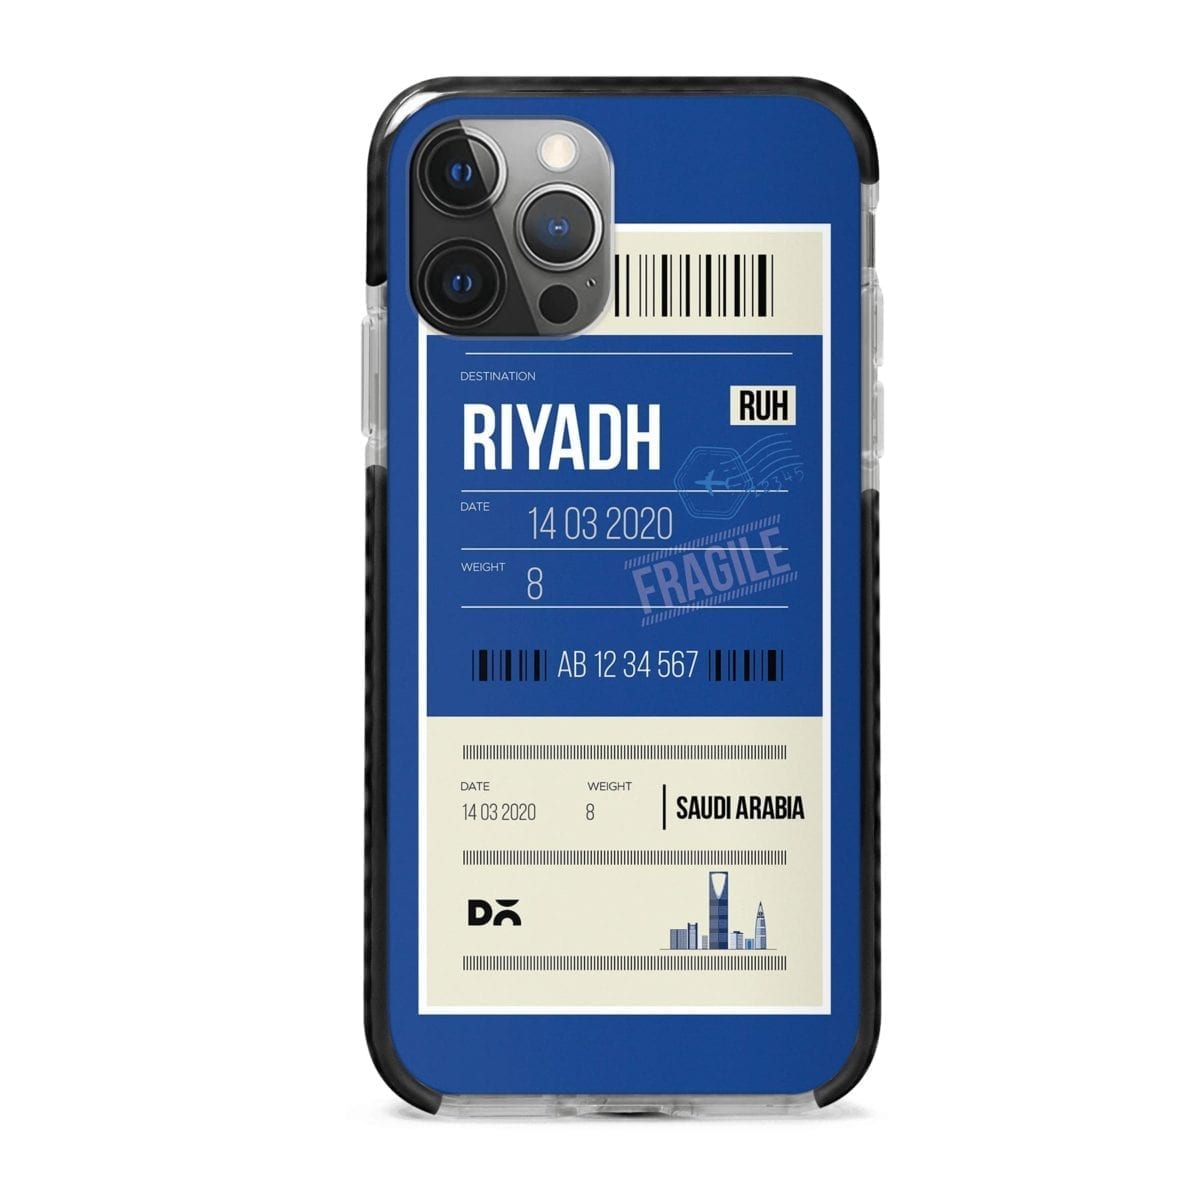 Riyadh City Tag Stride Case Cover for Apple iPhone 12 Pro and Apple iPhone 12 Pro Max with great design and shock proof | Klippik | Online Shopping | Kuwait UAE Saudi